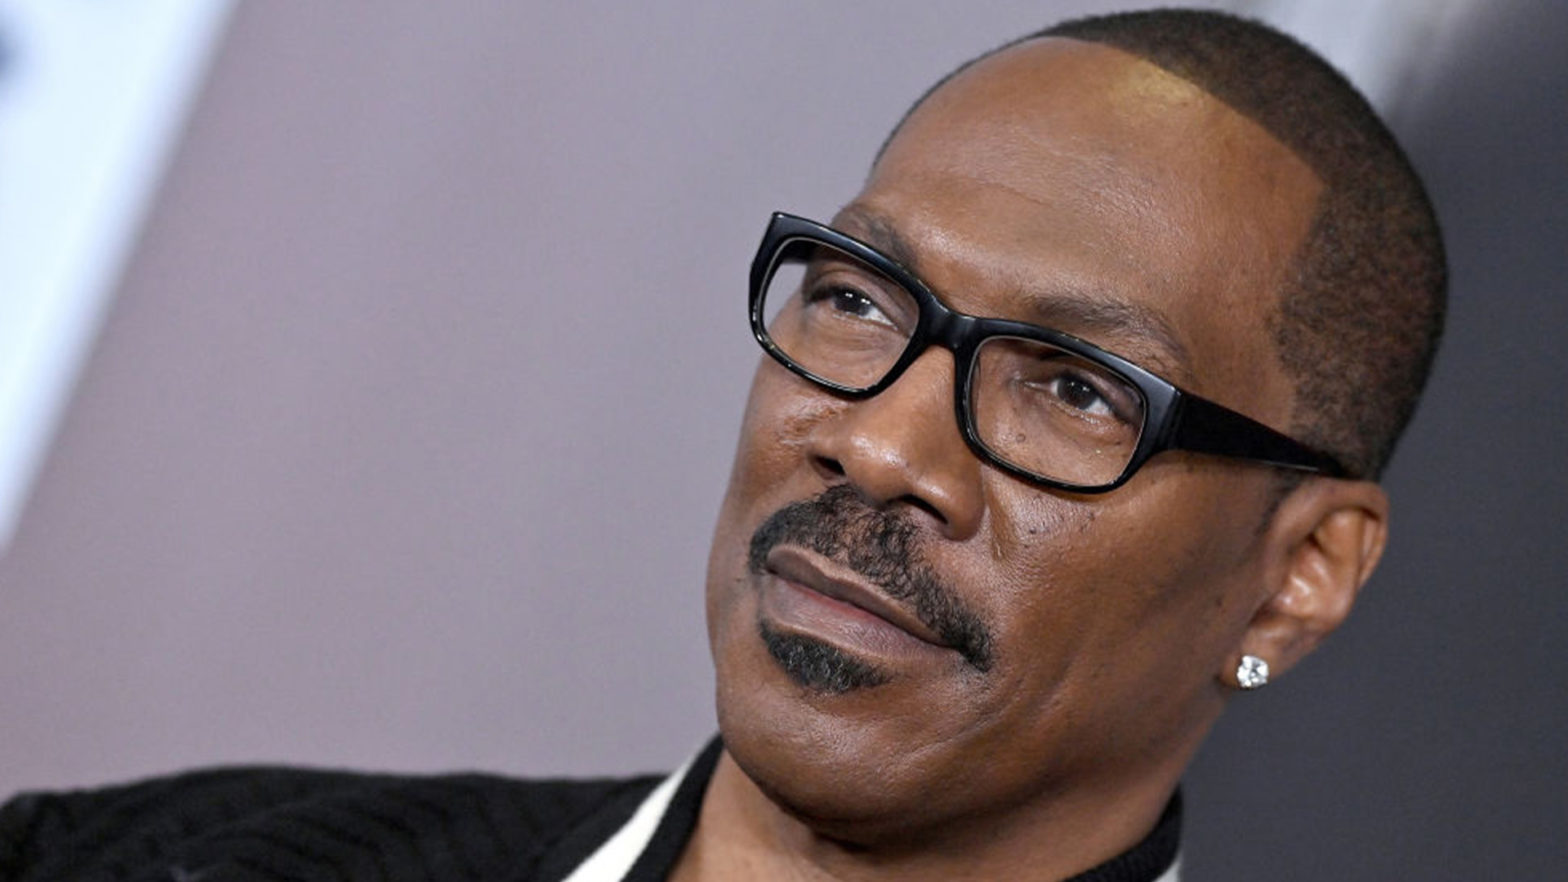 While Its Replica Fetched $15.3M, Eddie Murphy Reveals He Paid $50K For The Original 'Sugar Shack' Painting